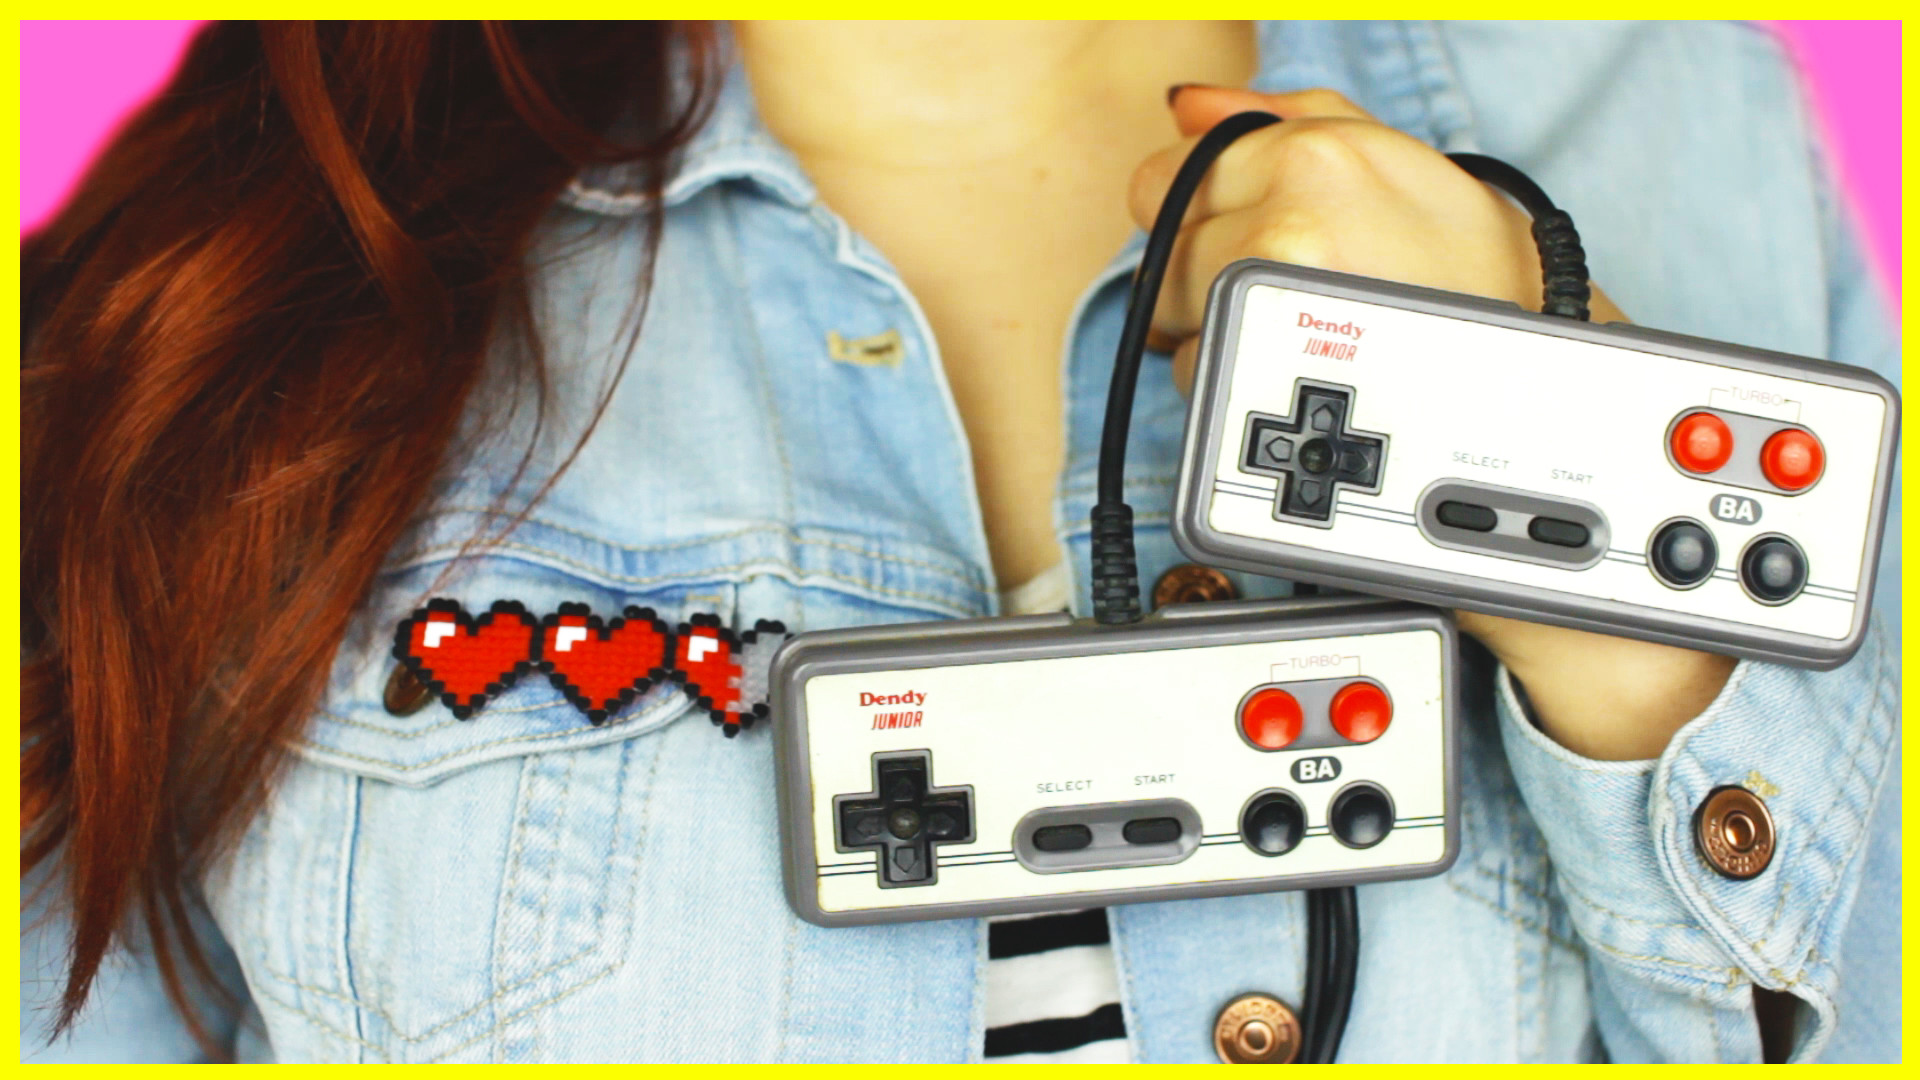 Nerd Gift Ideas For Boyfriend
 Awesome DIY Gift Ideas For Gamers & Geeks Makoccino